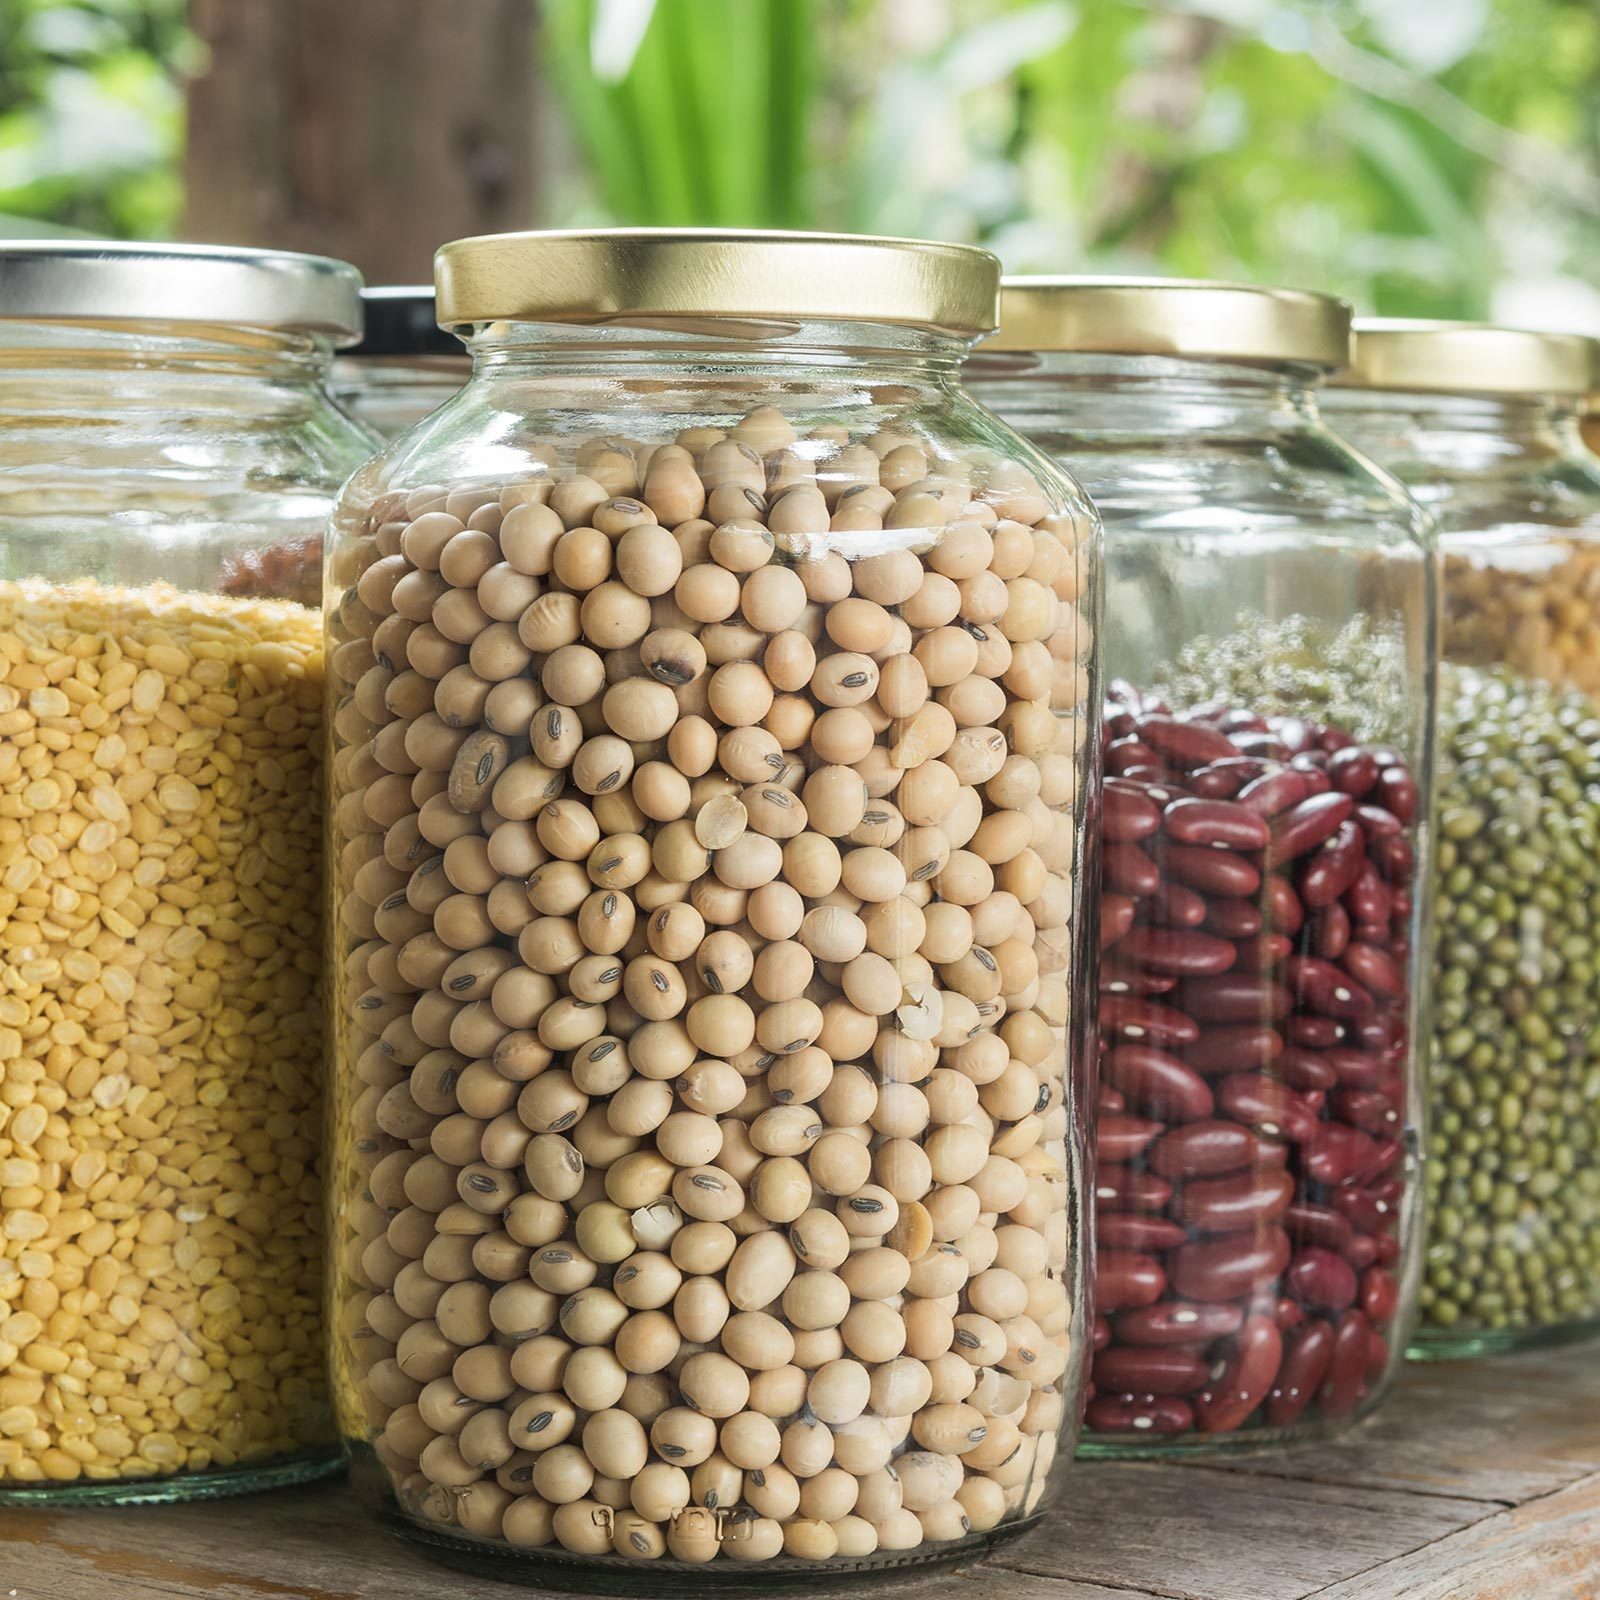 Various Dry Legumes In Glass Jar on wooden table